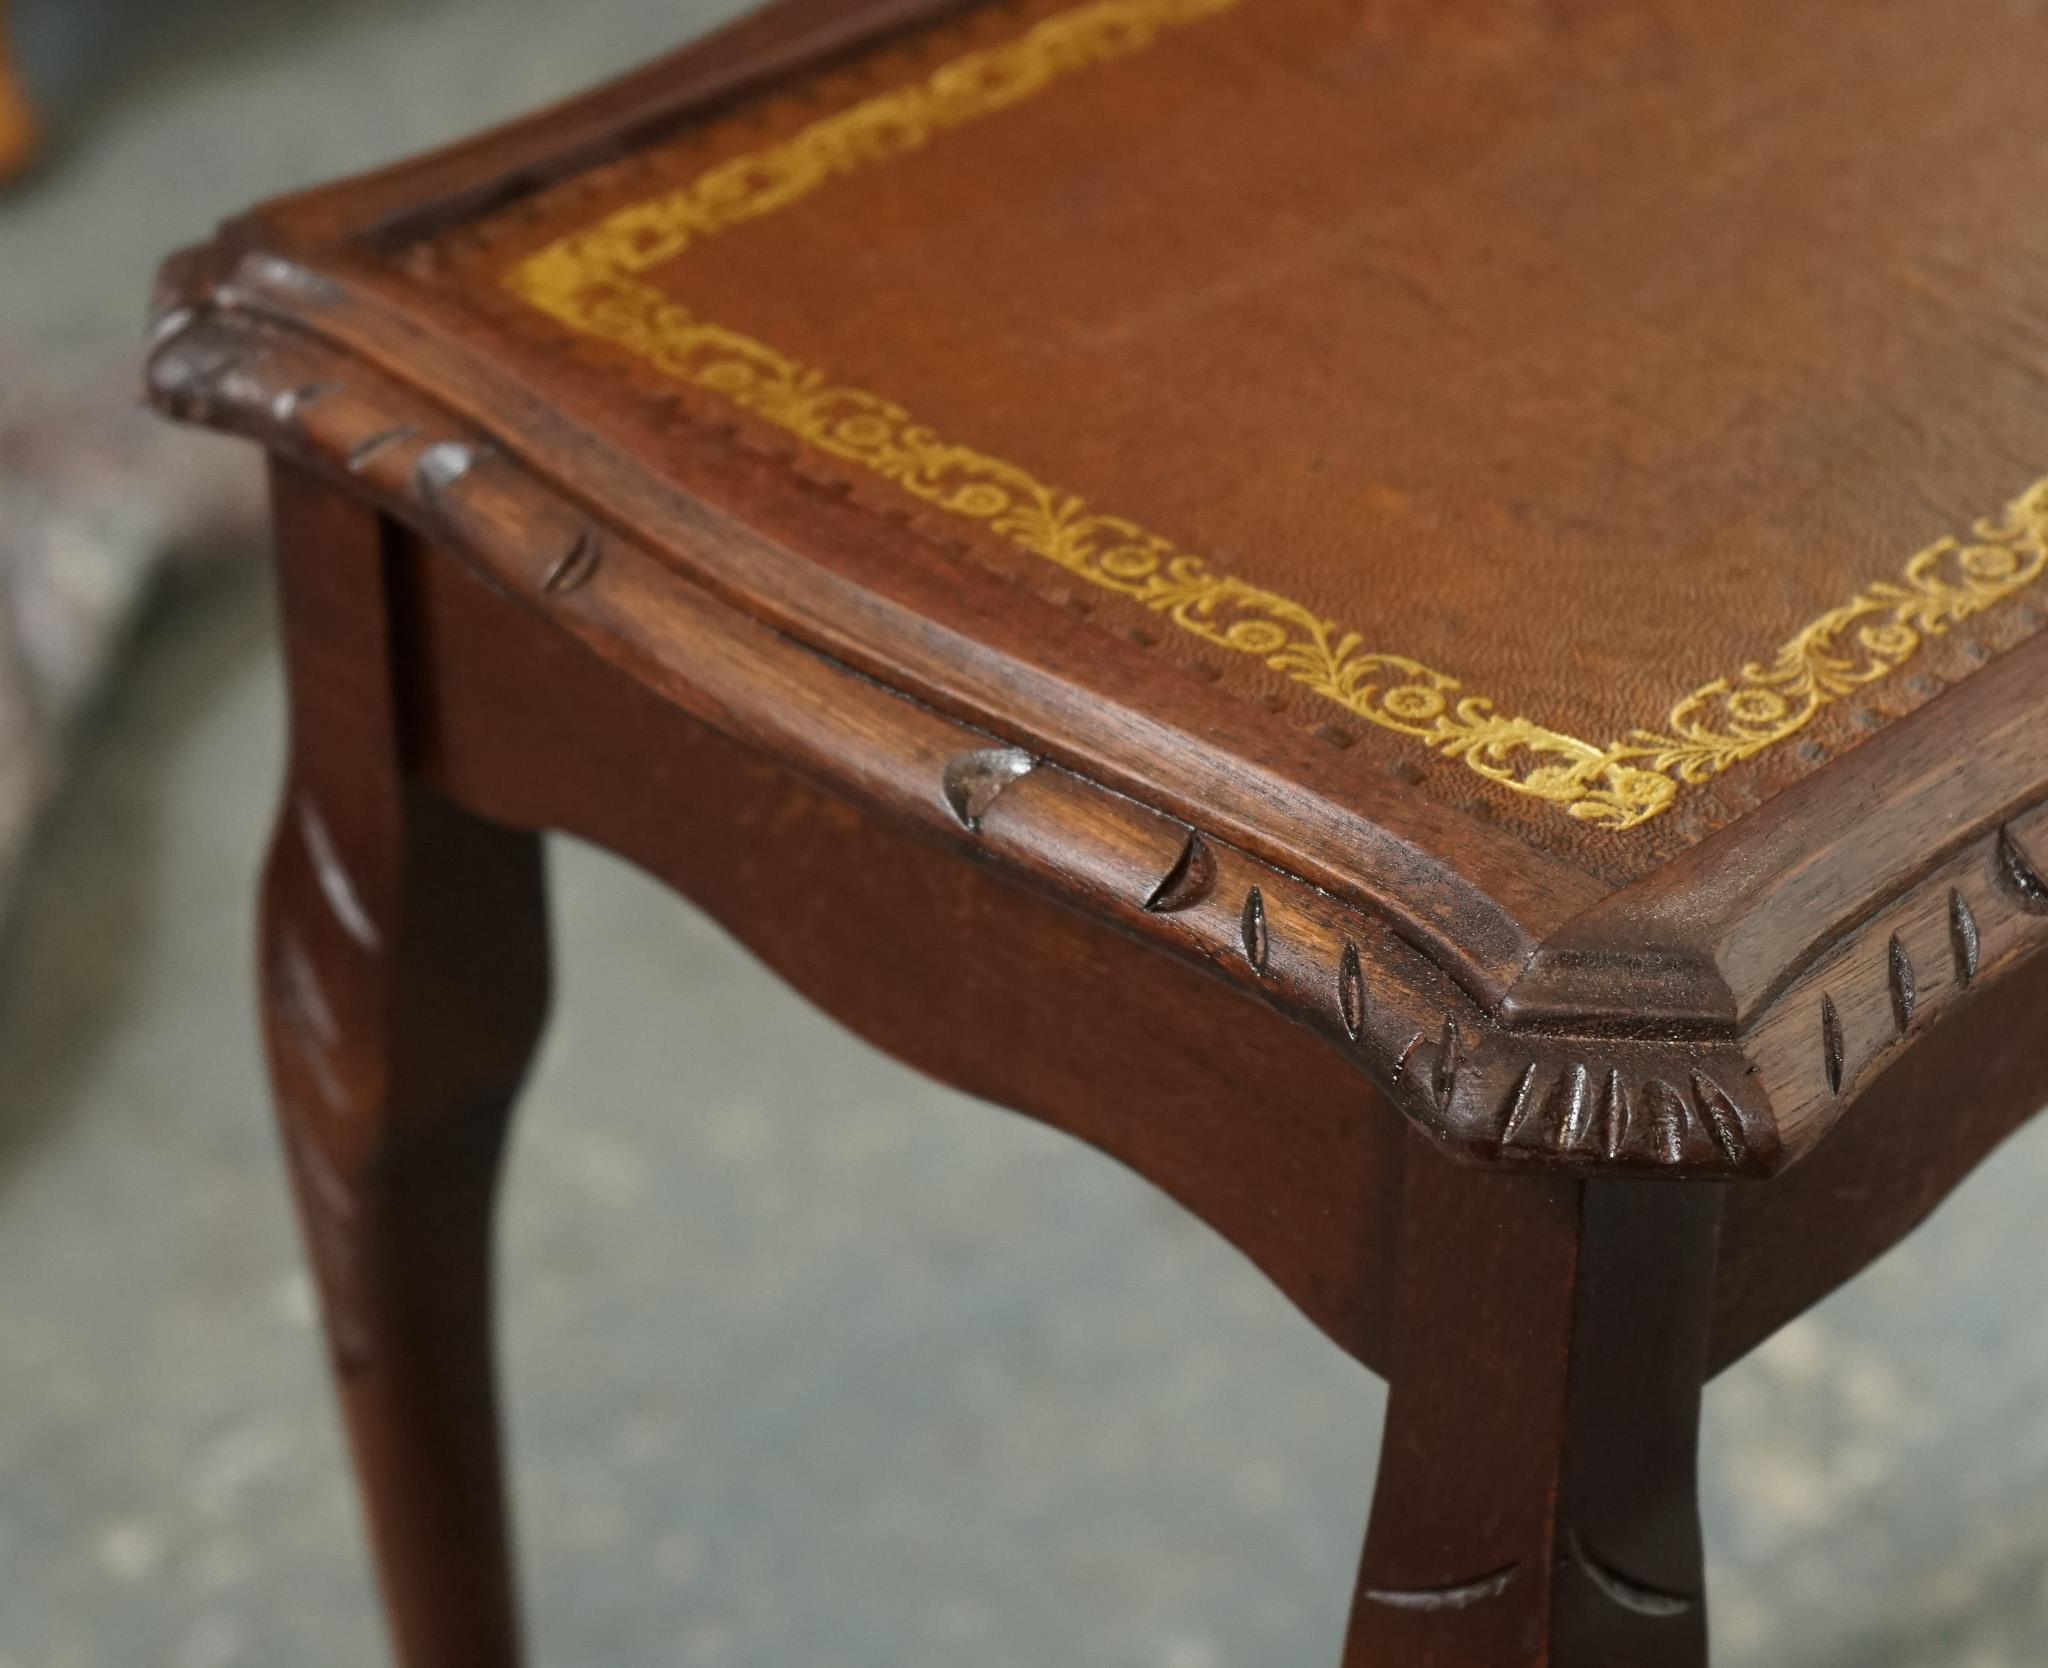 VINTAGE NEST OF TABLES QUEEN ANNE STYLE LEGS WiTH BROWN EMBOSsed LEATHER top en vente 5